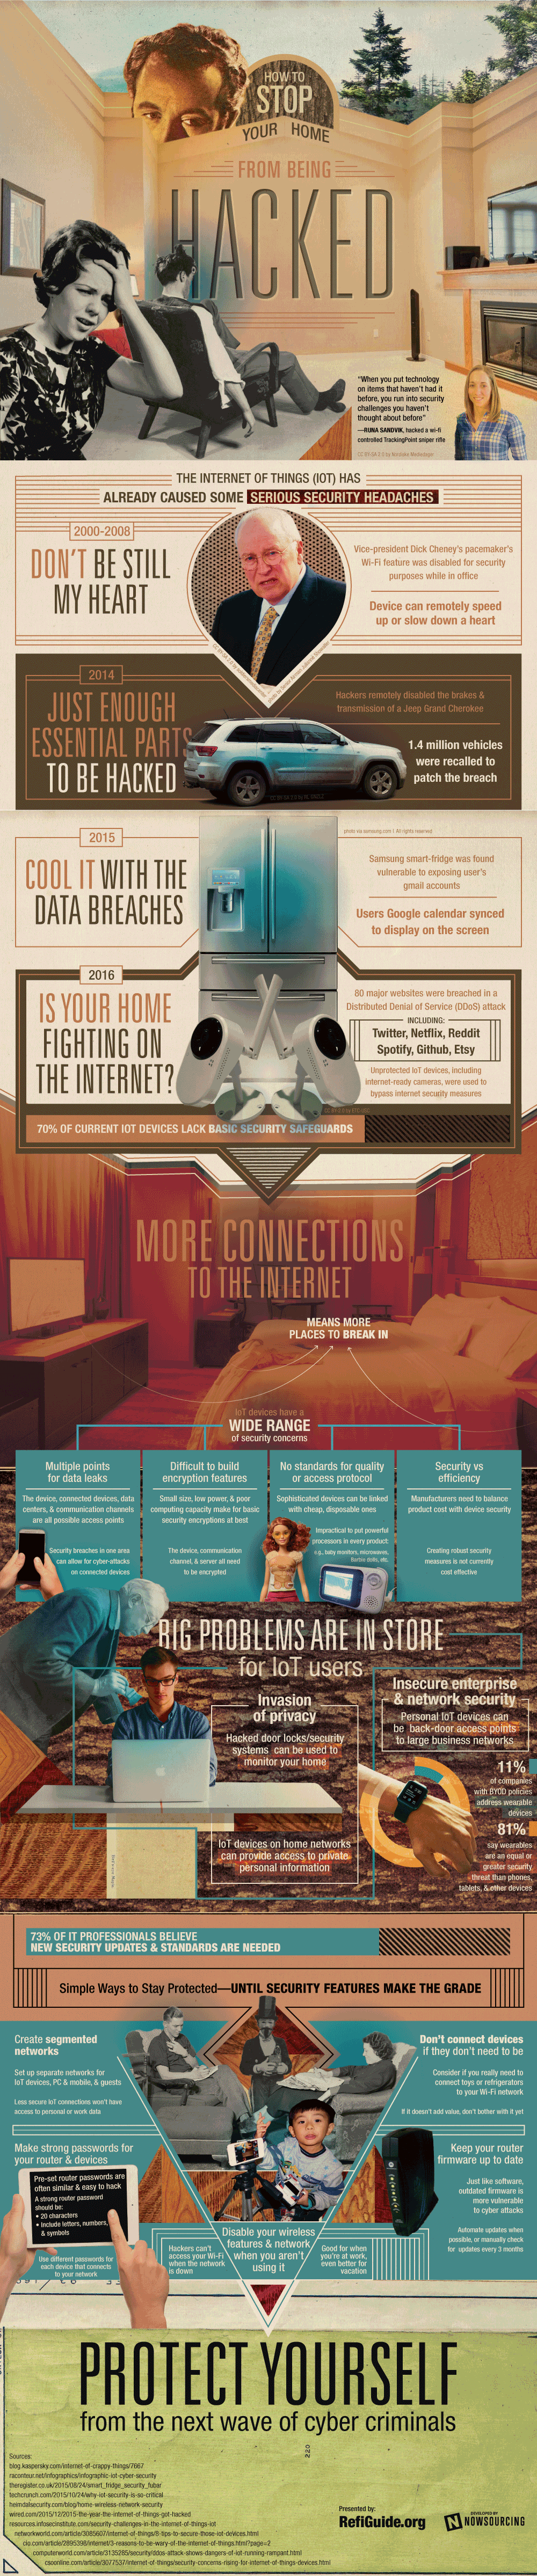 Hacking The Internet Of Things [Infographic]